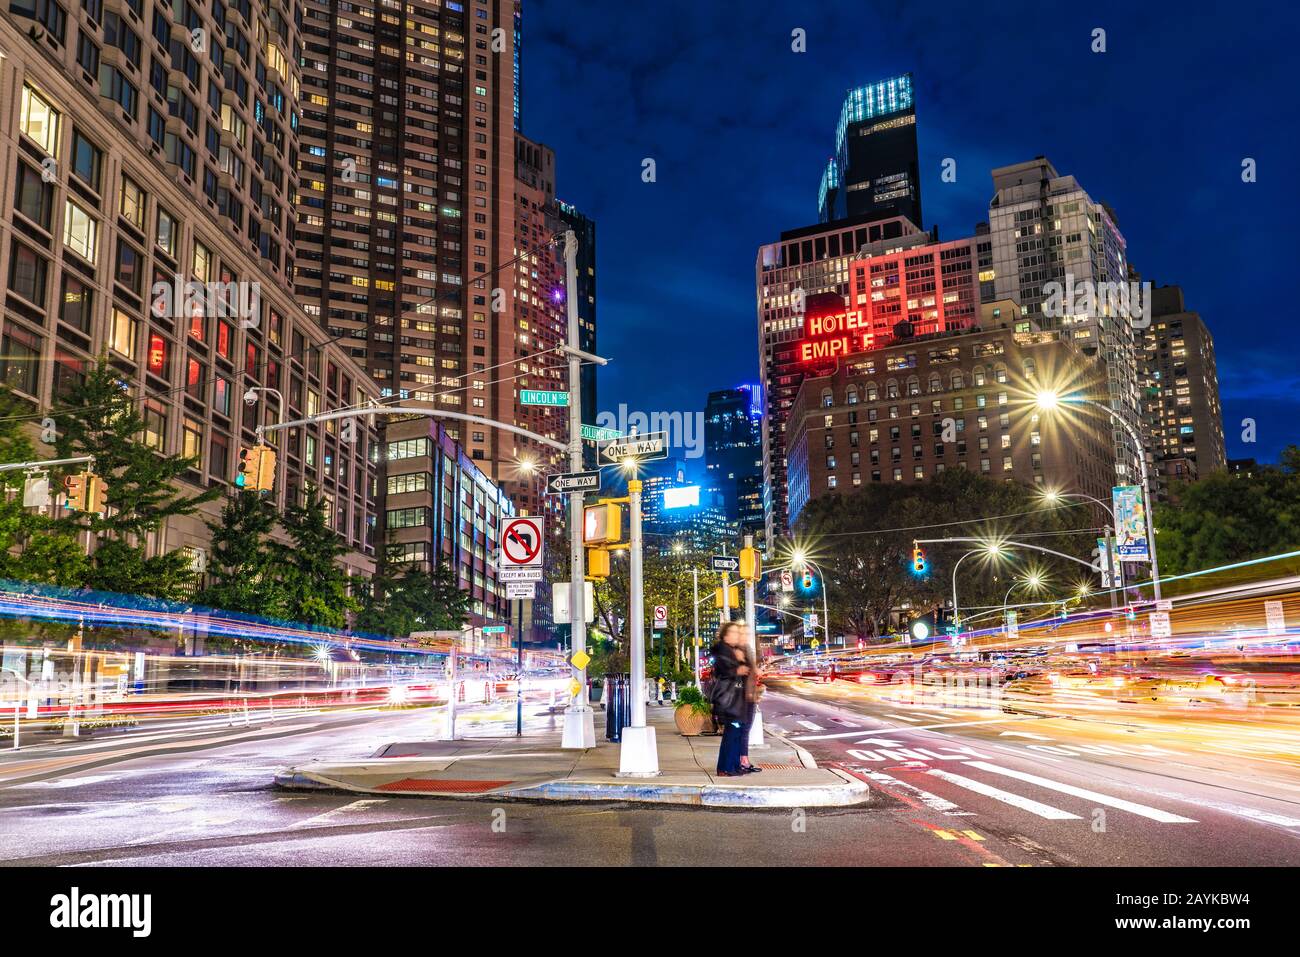 NEW YORK, USA - OCTOBER 09: View of an Upper West Side city street outside Lincoln Square at night on October 09, 2019 in New York Stock Photo